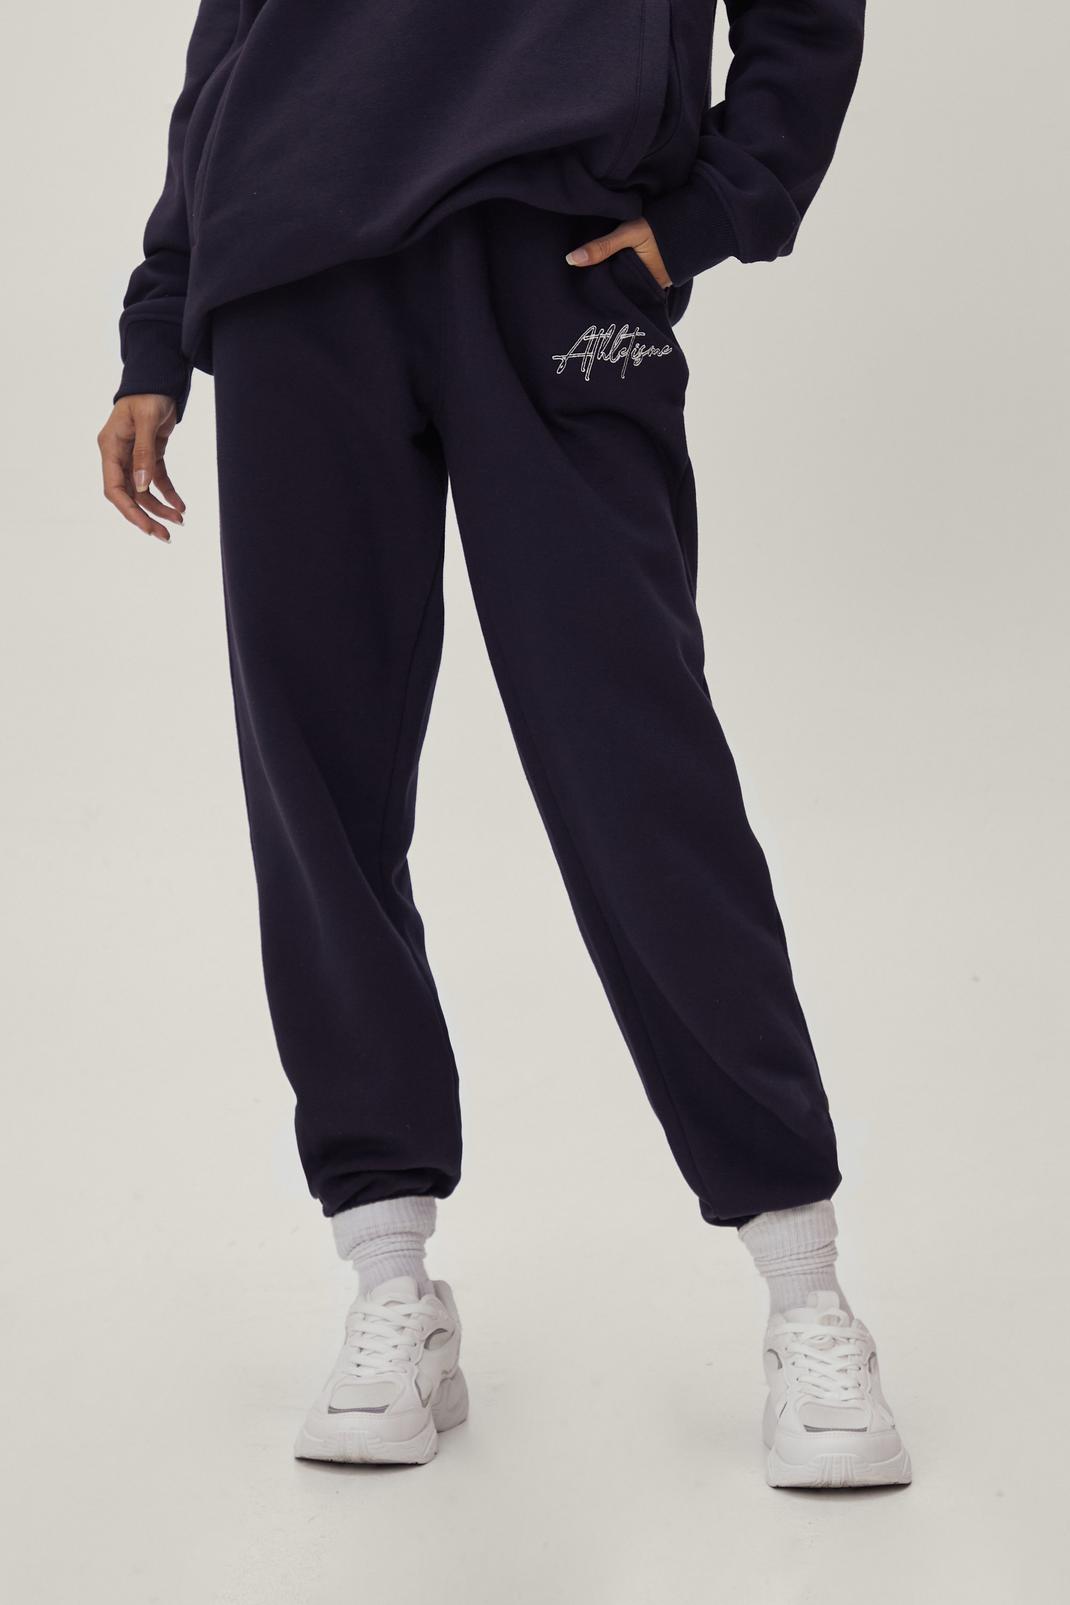 Navy Embroidered Athleisure Relaxed Fit Joggers image number 1